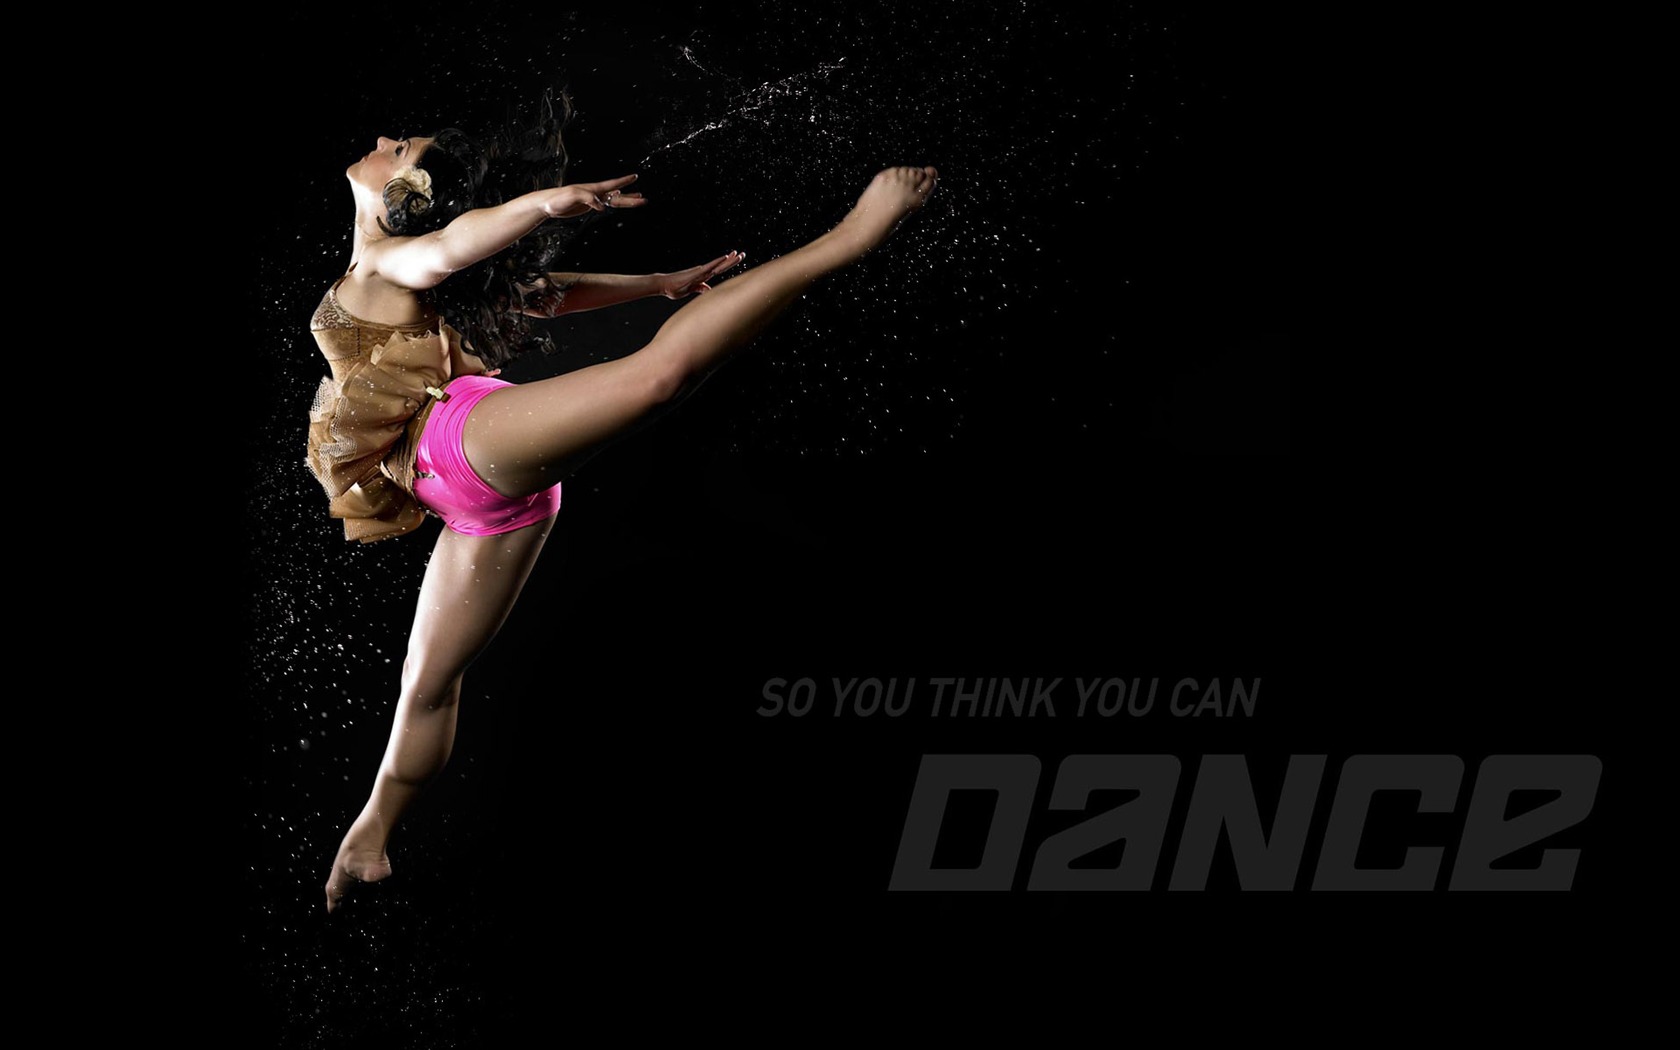 So You Think You Can Dance wallpaper (1) #17 - 1680x1050